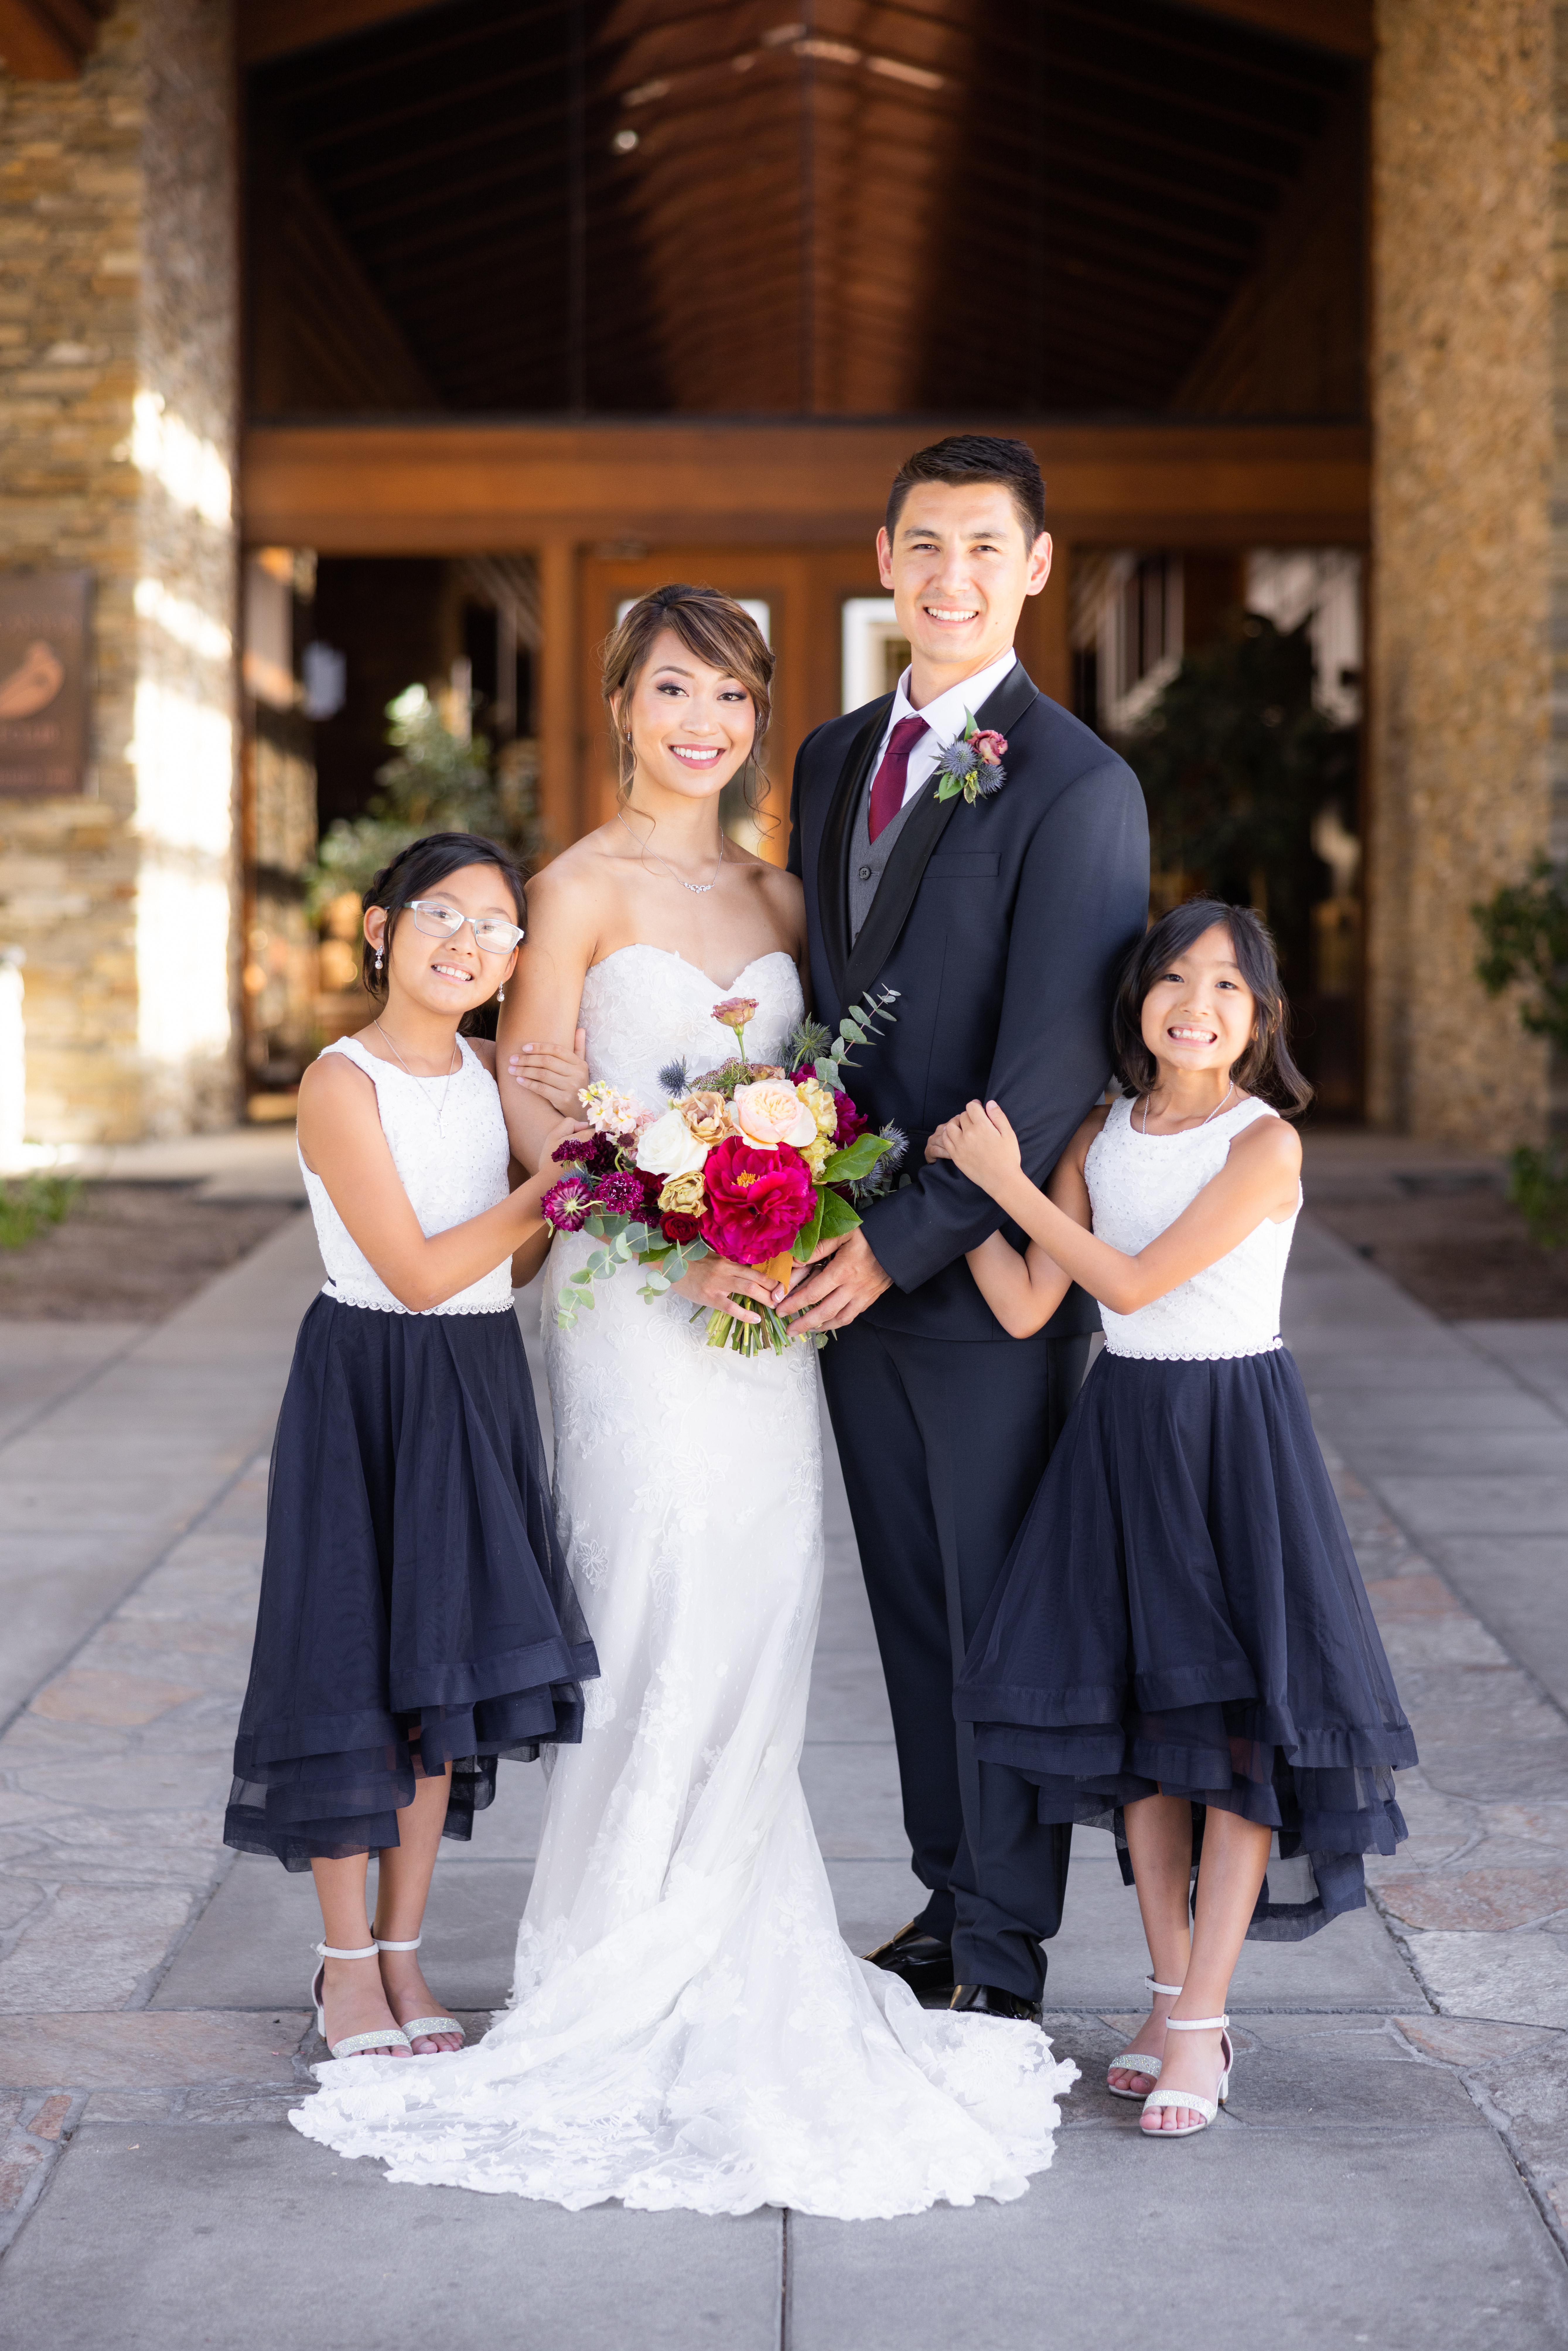 bride in strapless lace wedding dress and groom in navy tuxedo stand with flower girls in coordinating navy and white dresses